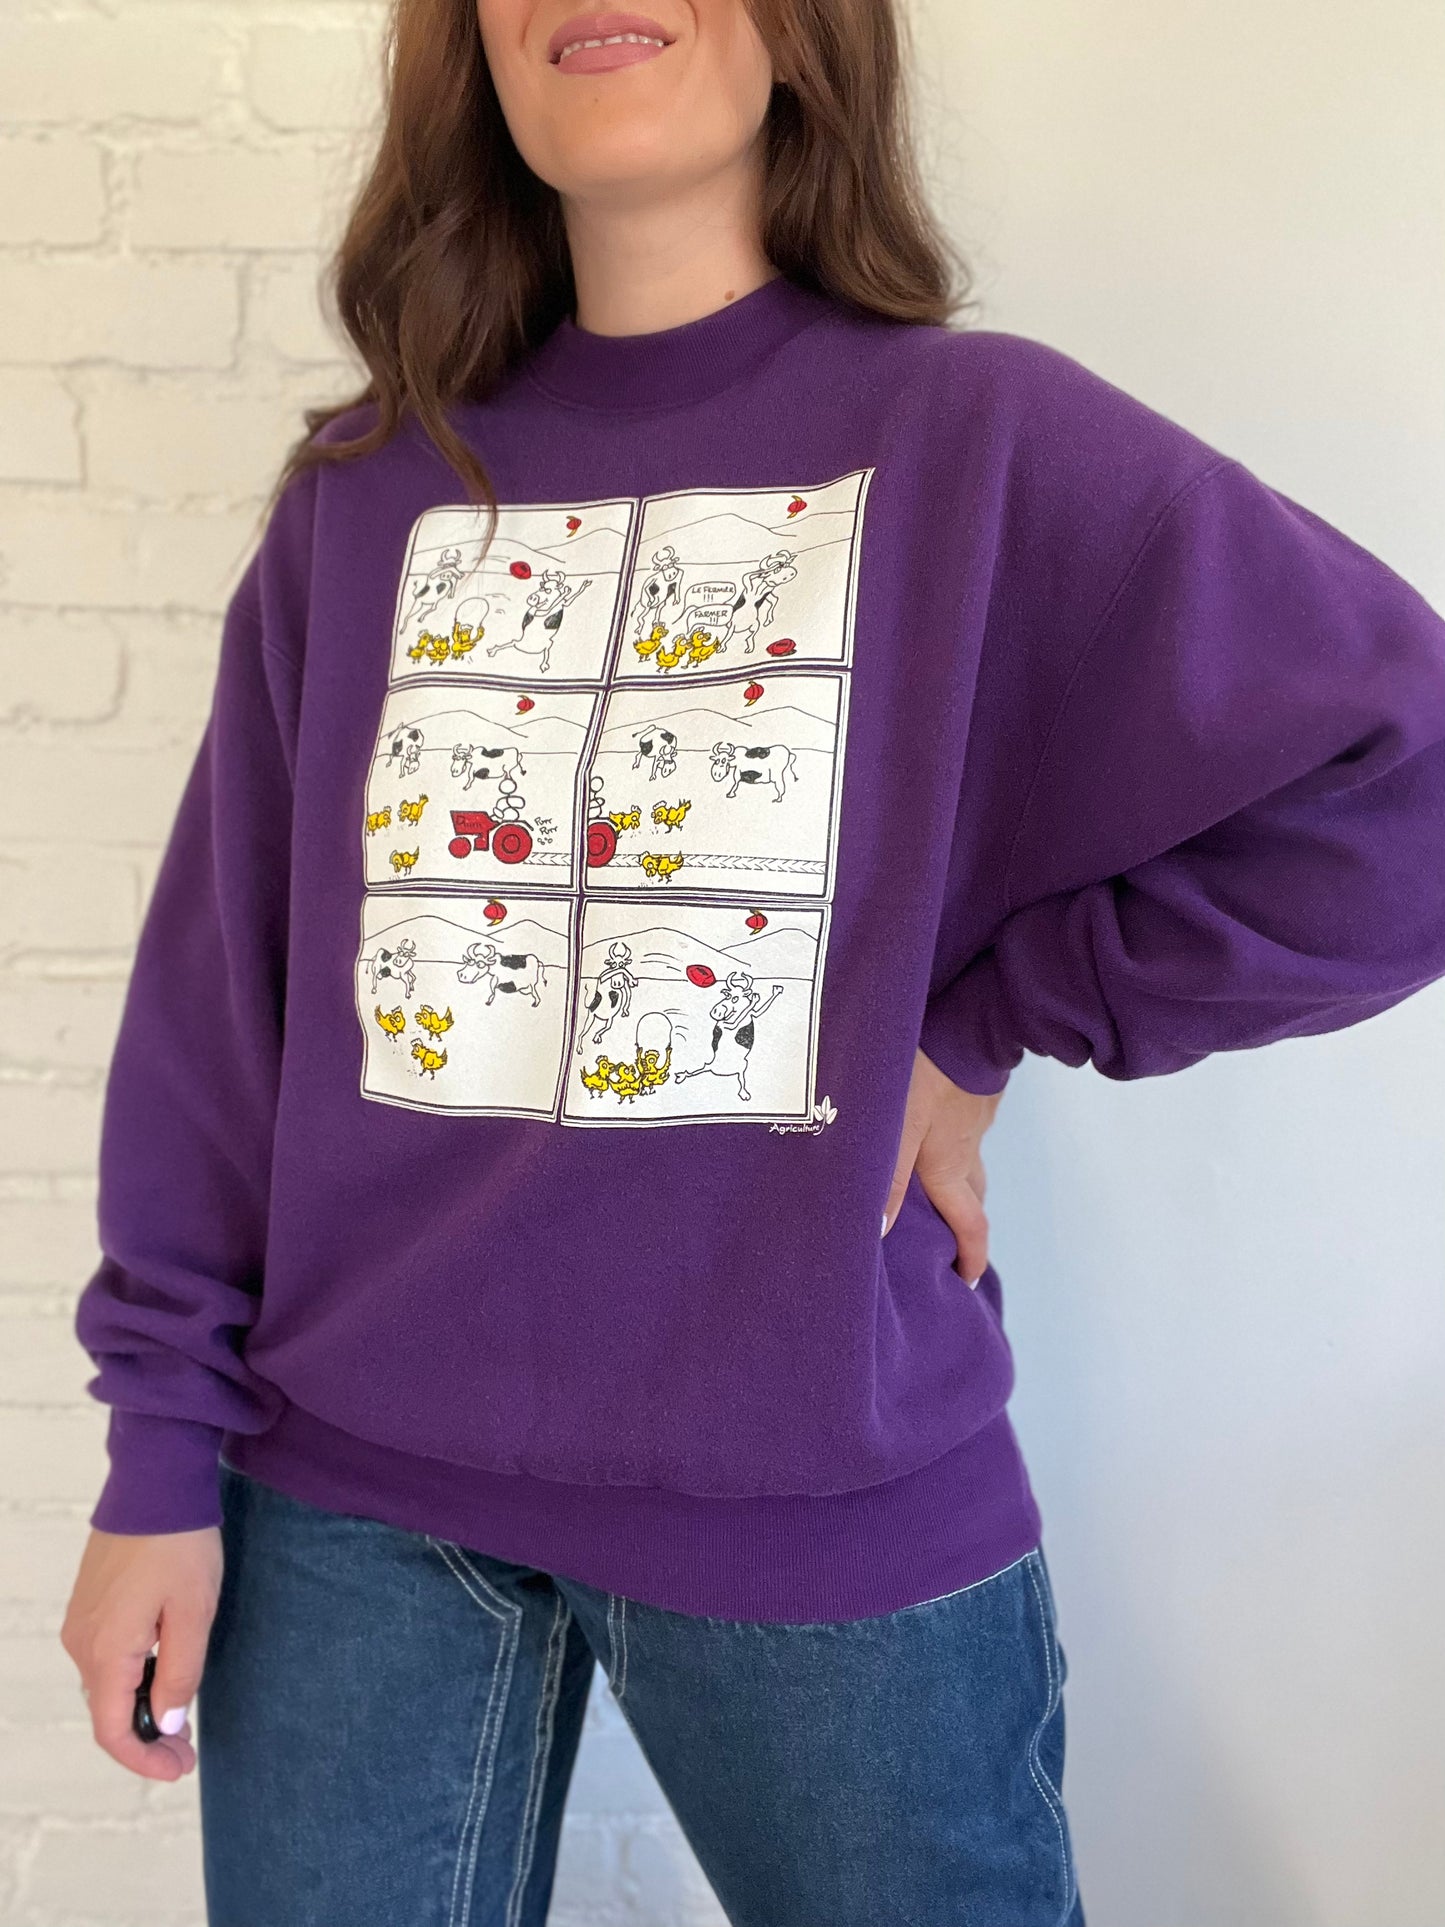 Football Cows Agriculture Sweater - L/XL